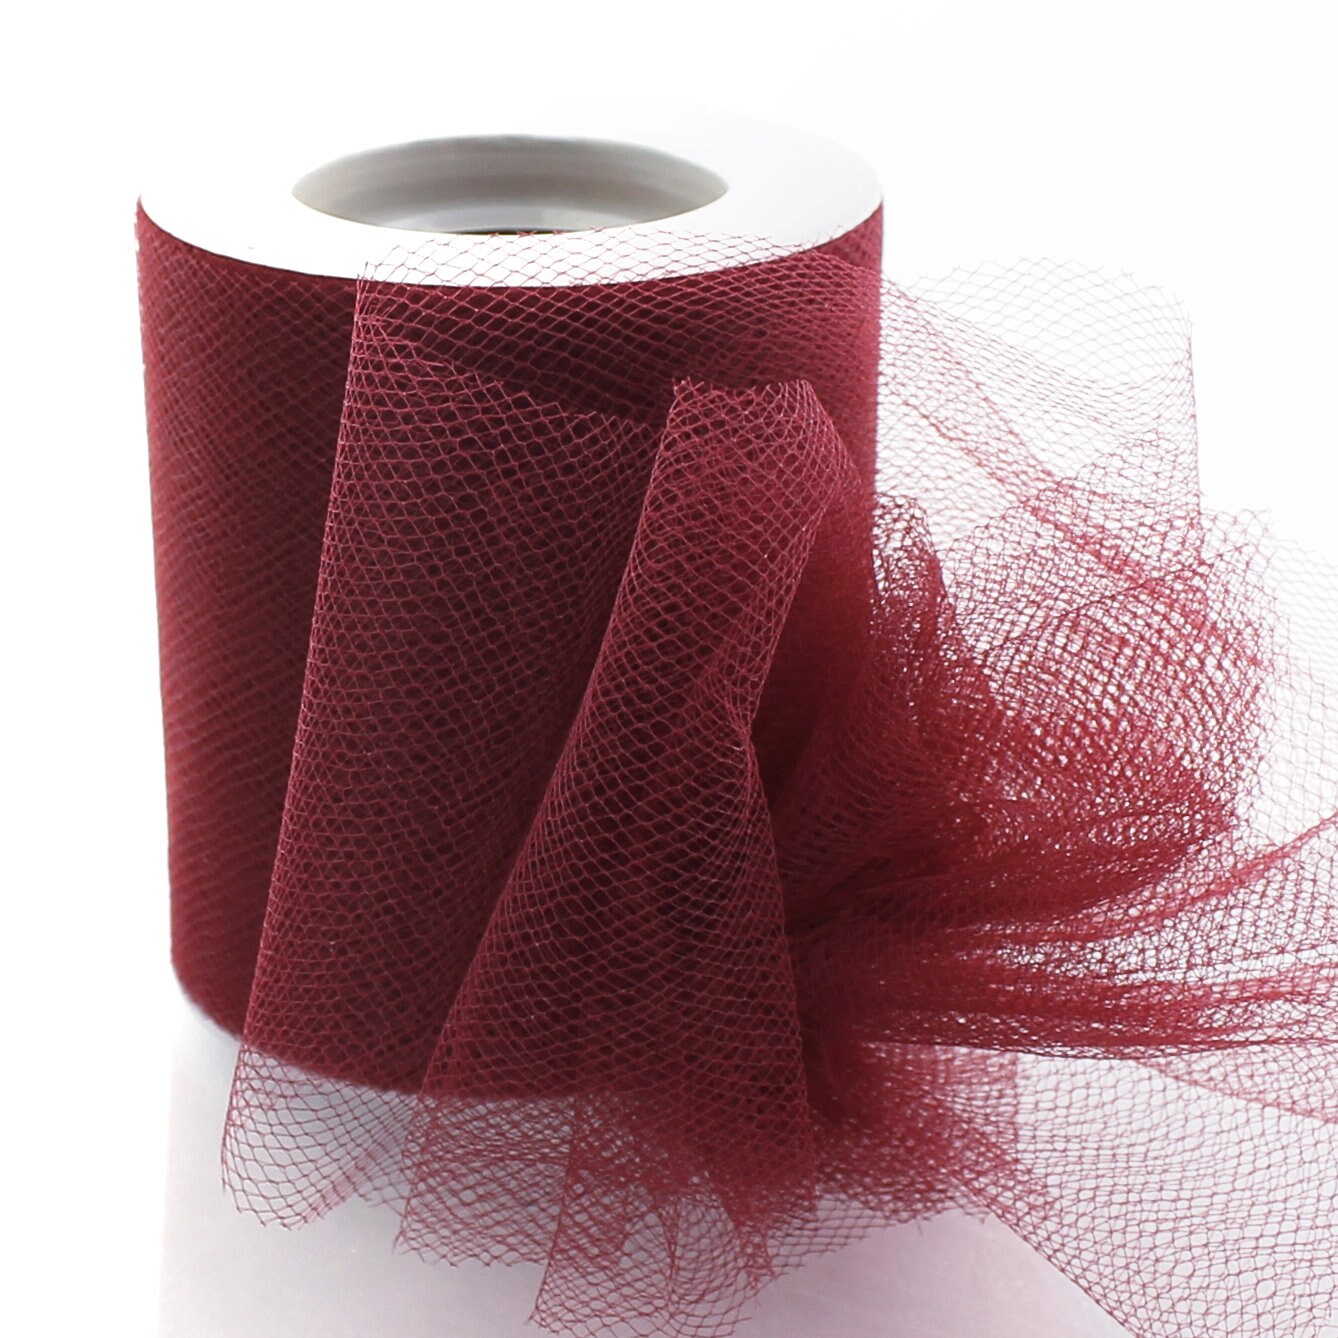 Globleland 5 Roll Deco Mesh Ribbons, Tulle Fabric, Tulle Roll